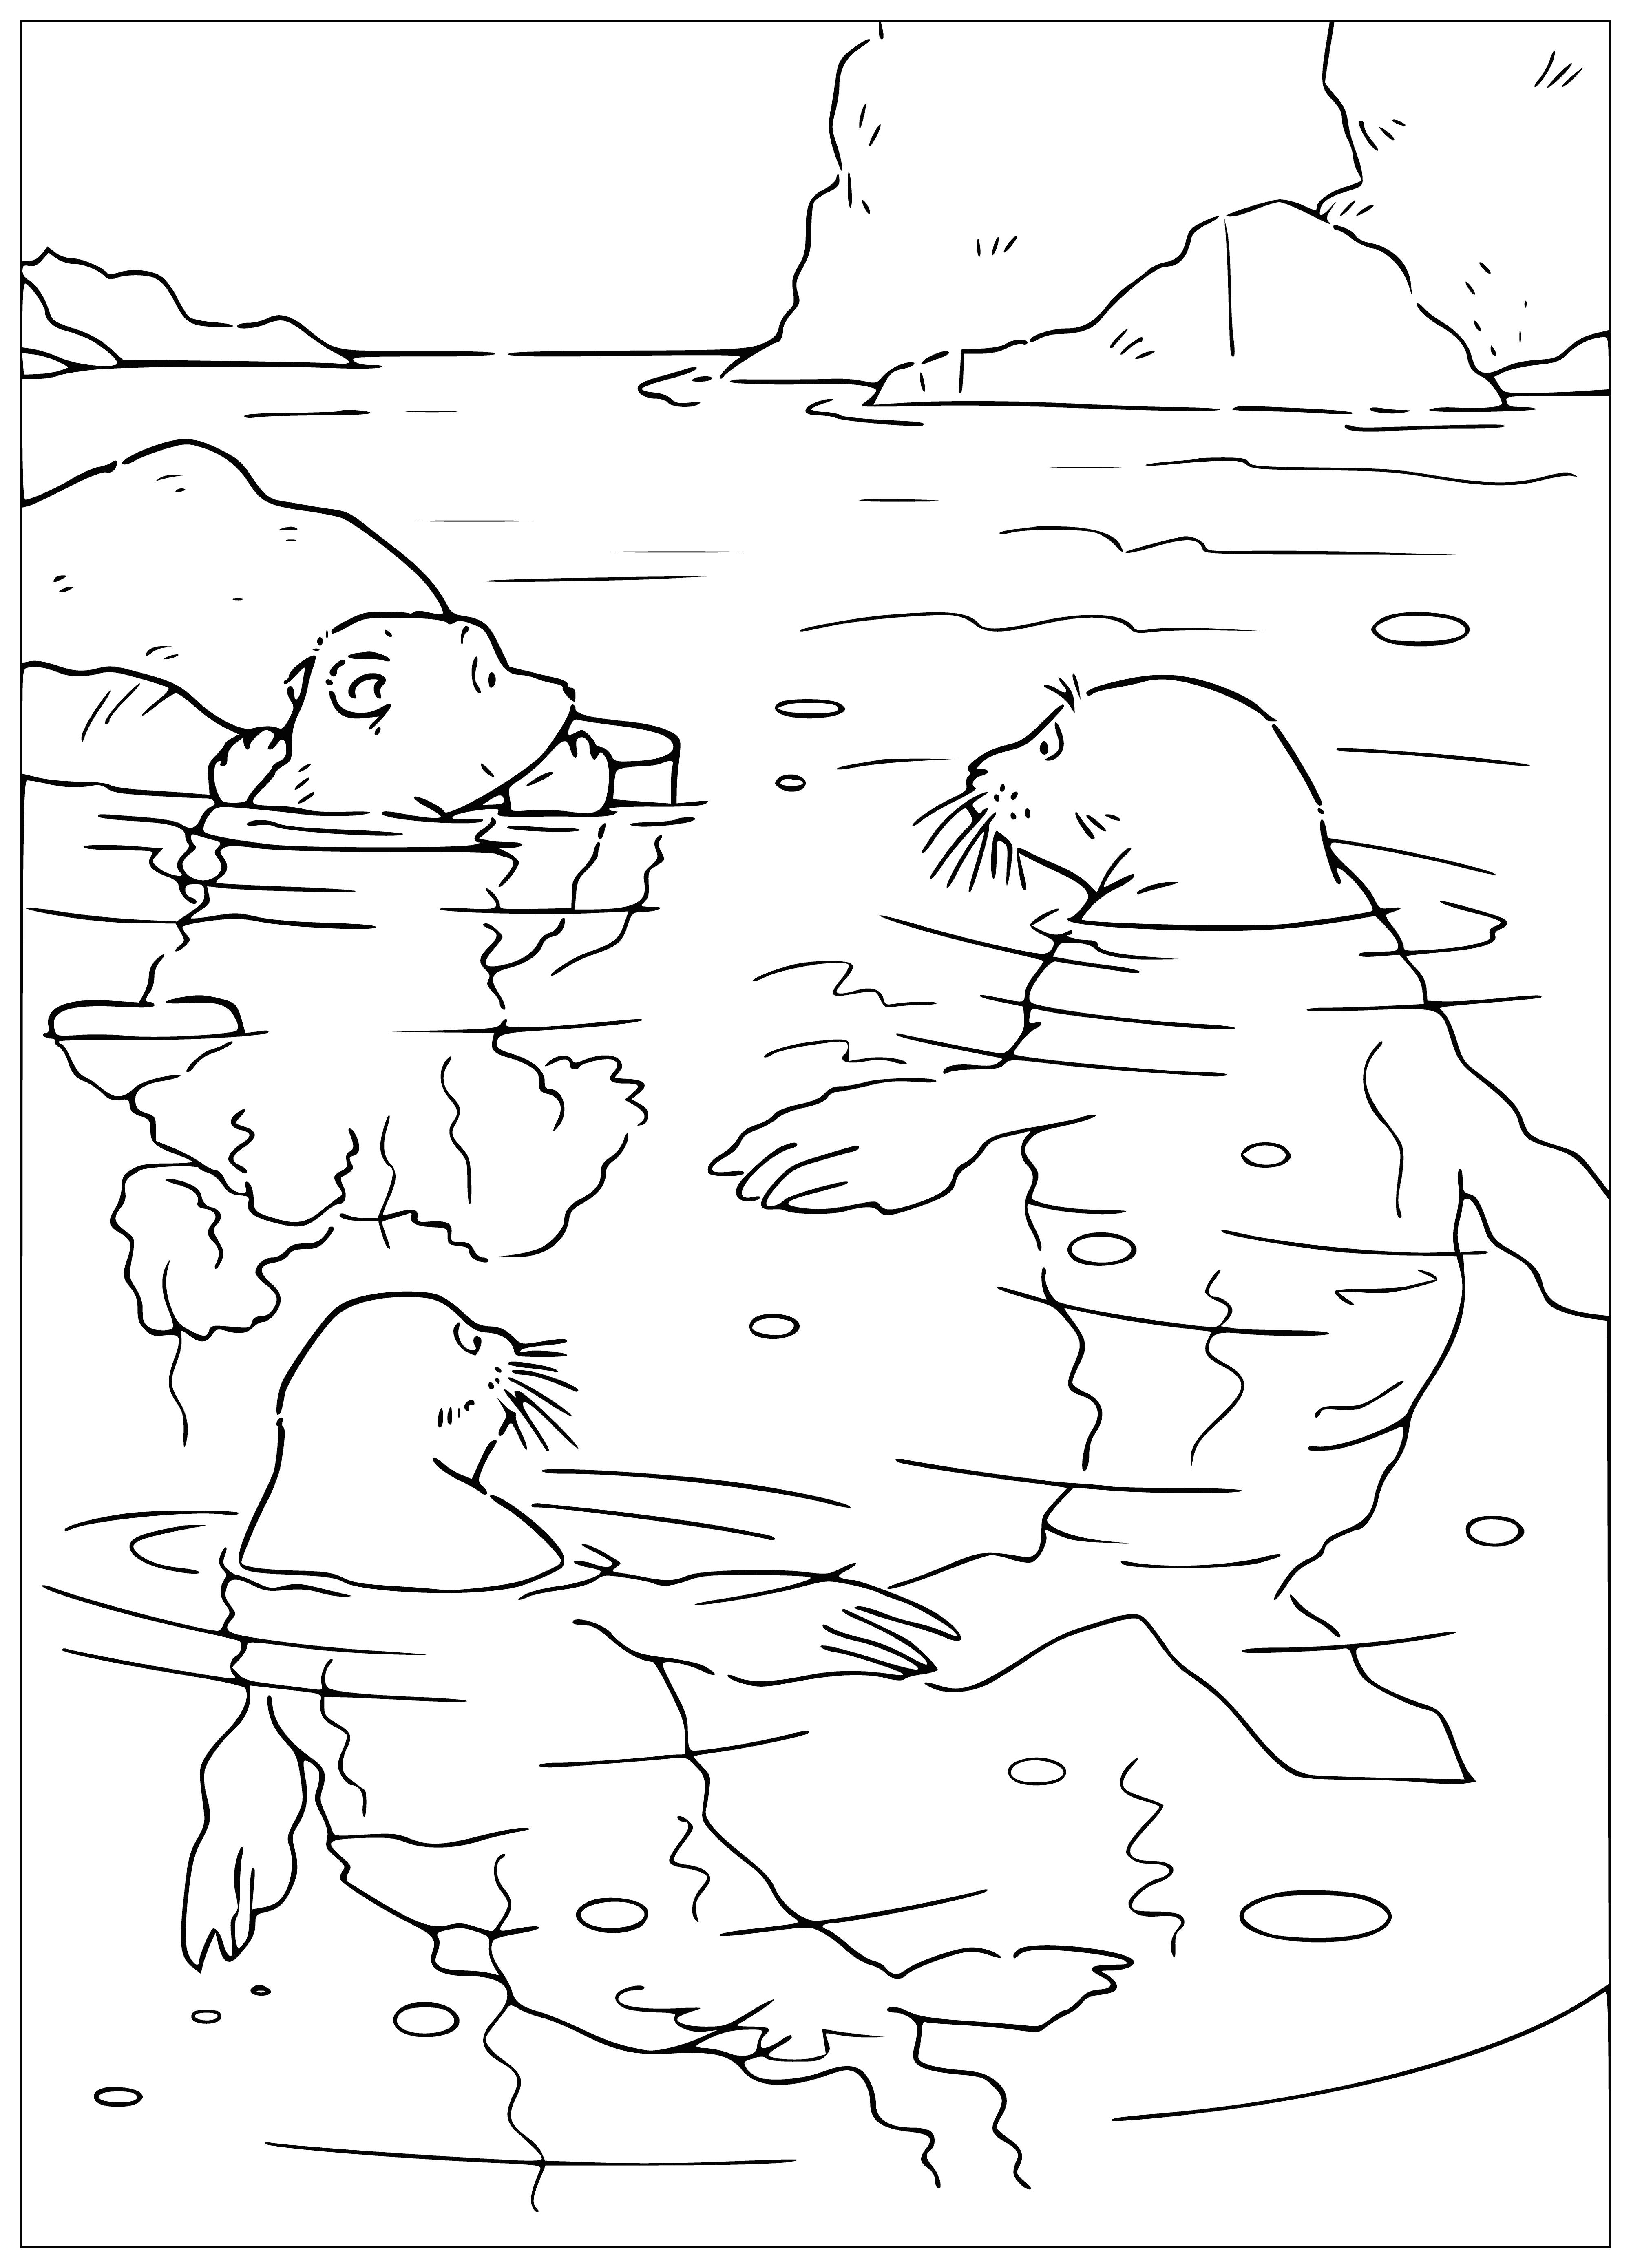 Lars and seals coloring page